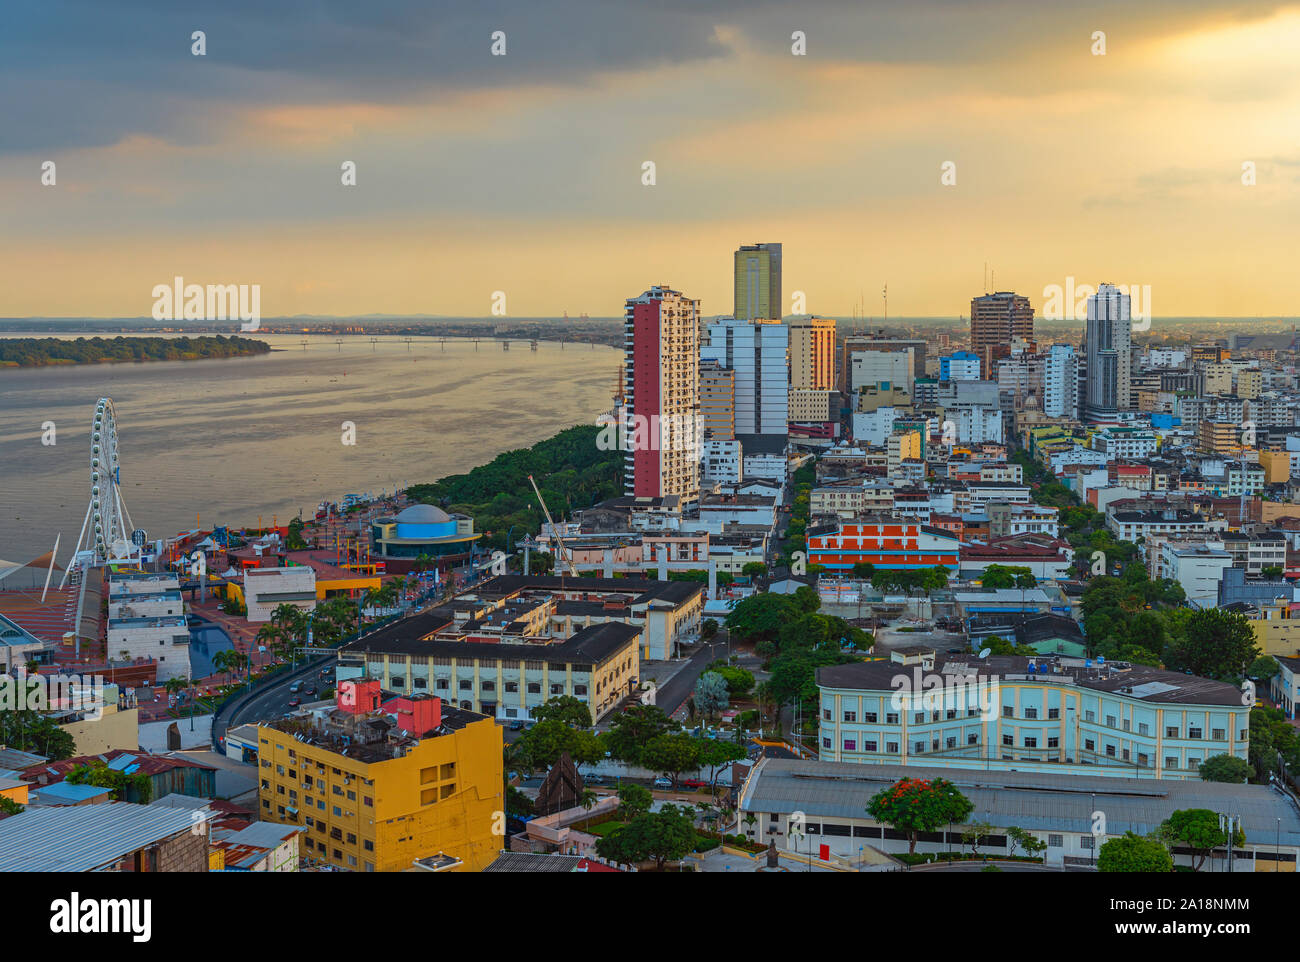 Cityscape of Guayaquil city at sunset with the Guayas river and skyscraper skyline, Guayaquil, Ecuador. Stock Photo